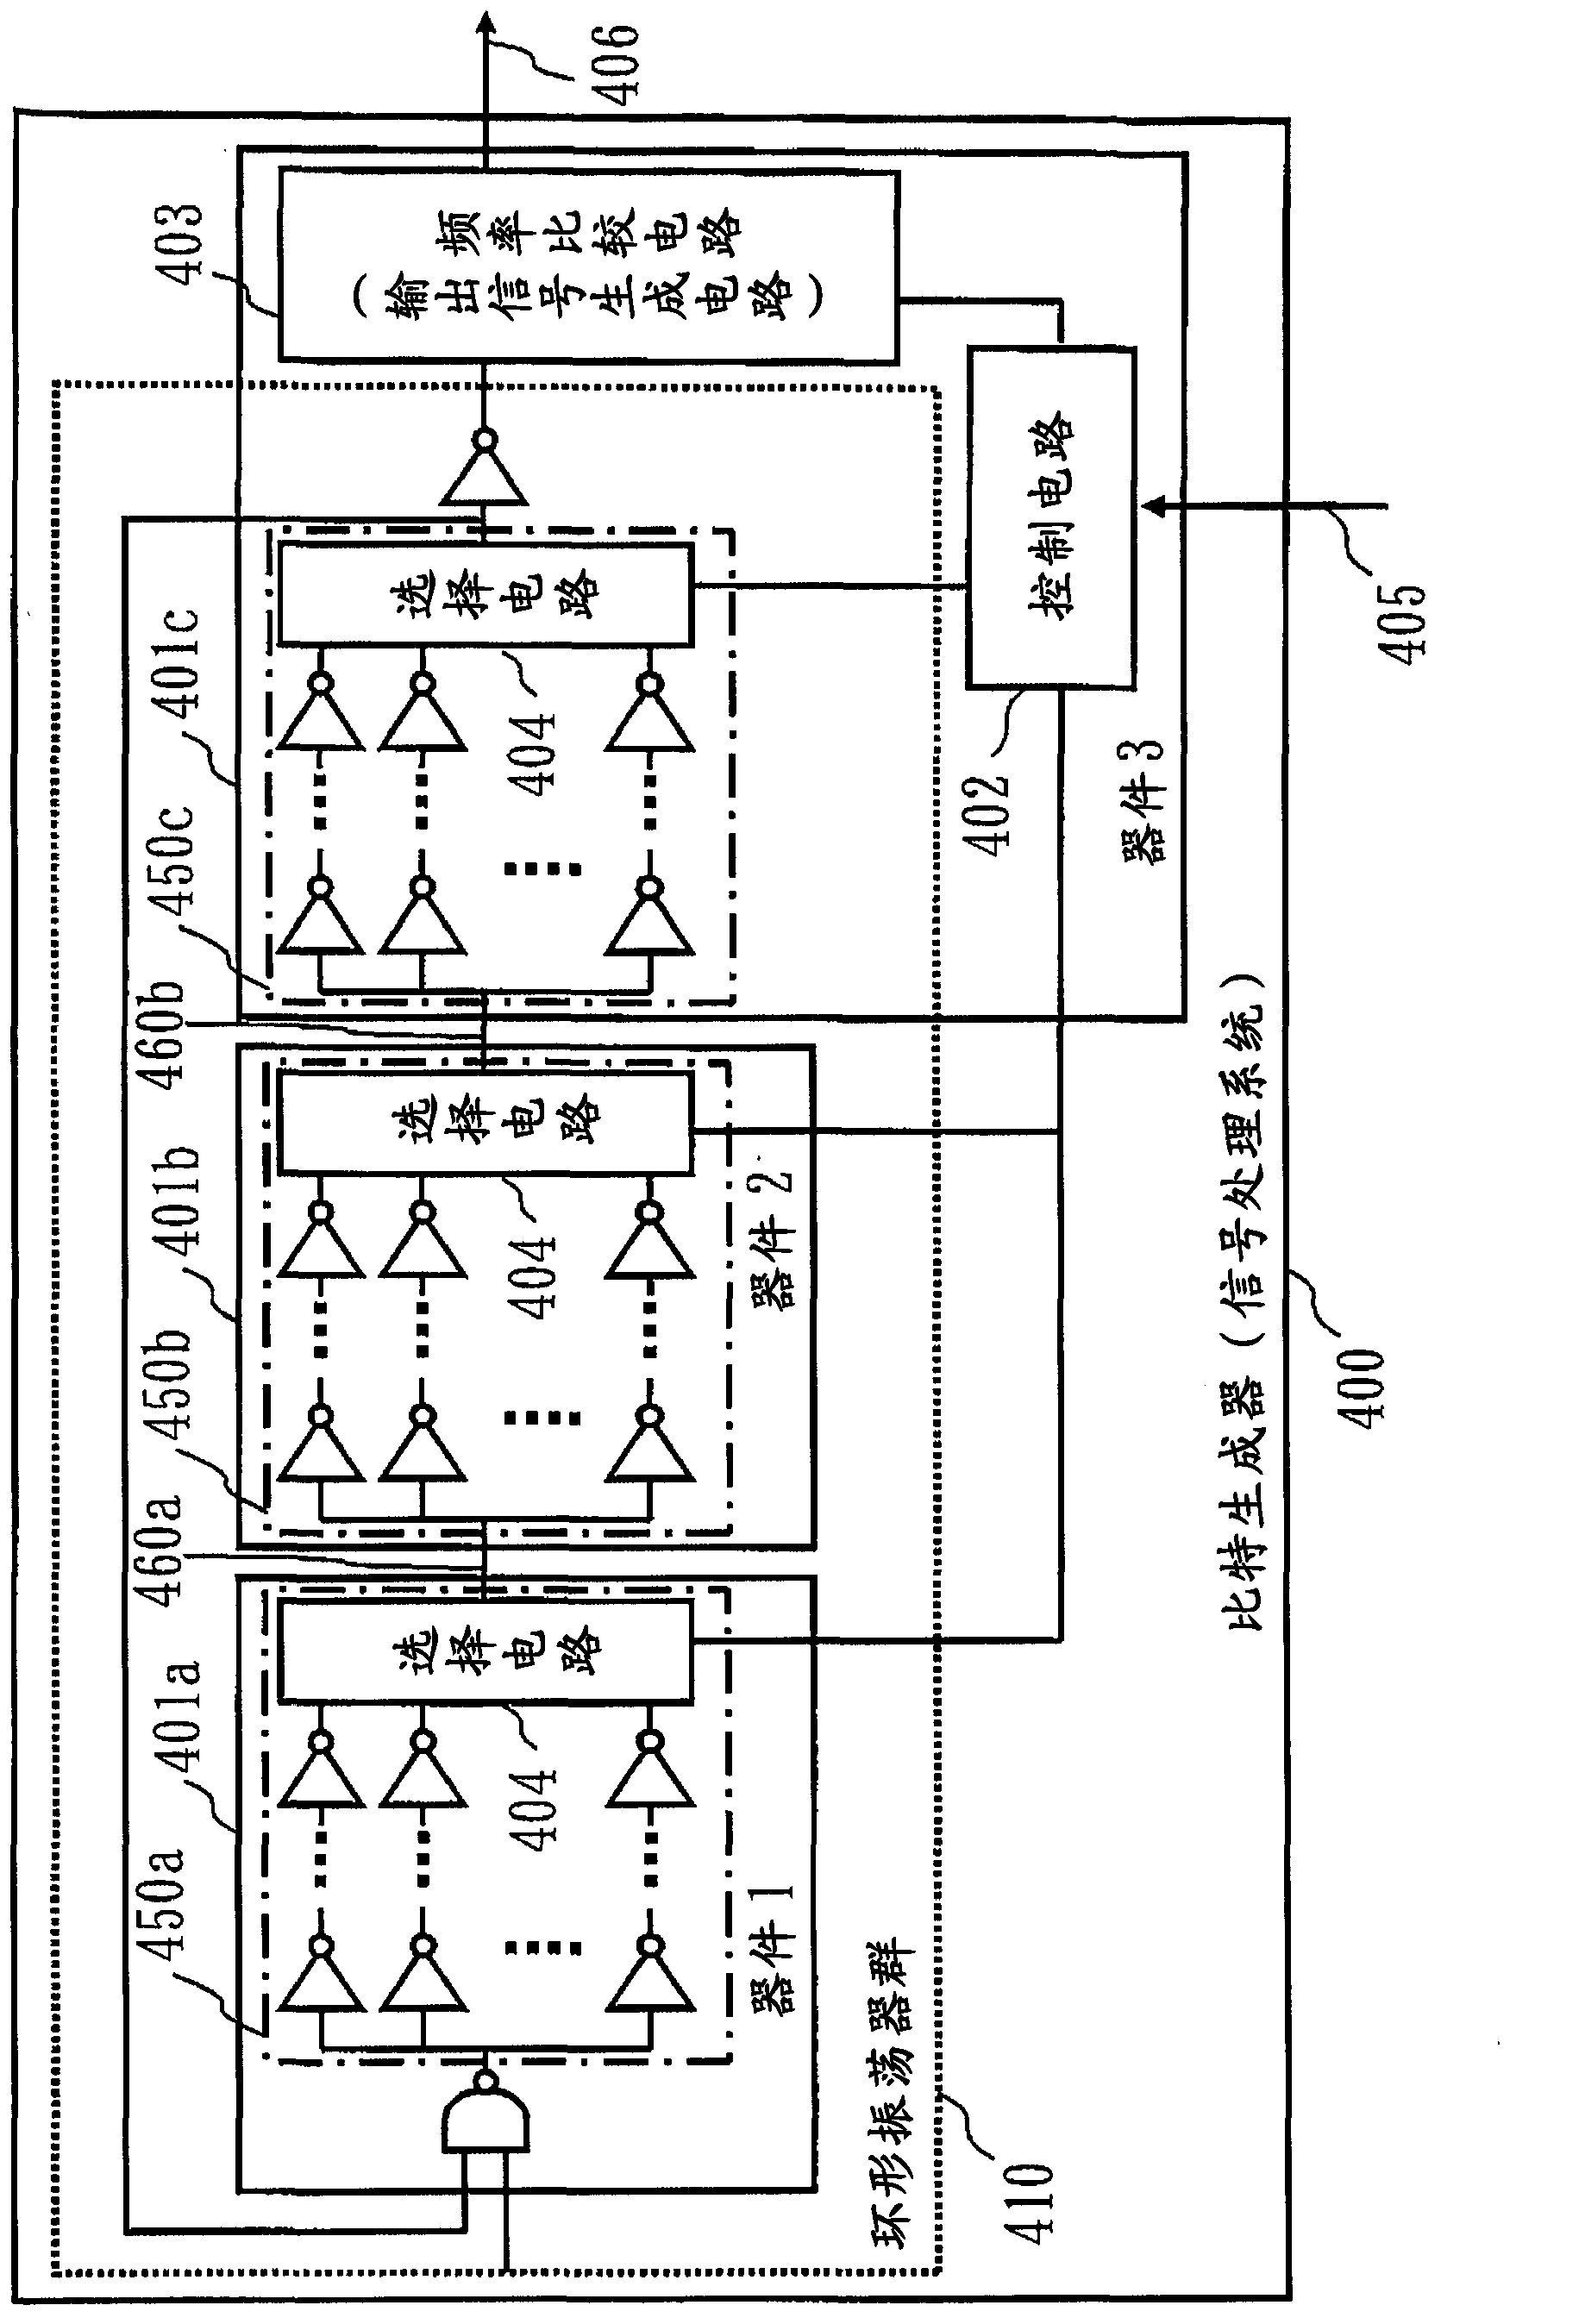 Signal processing system